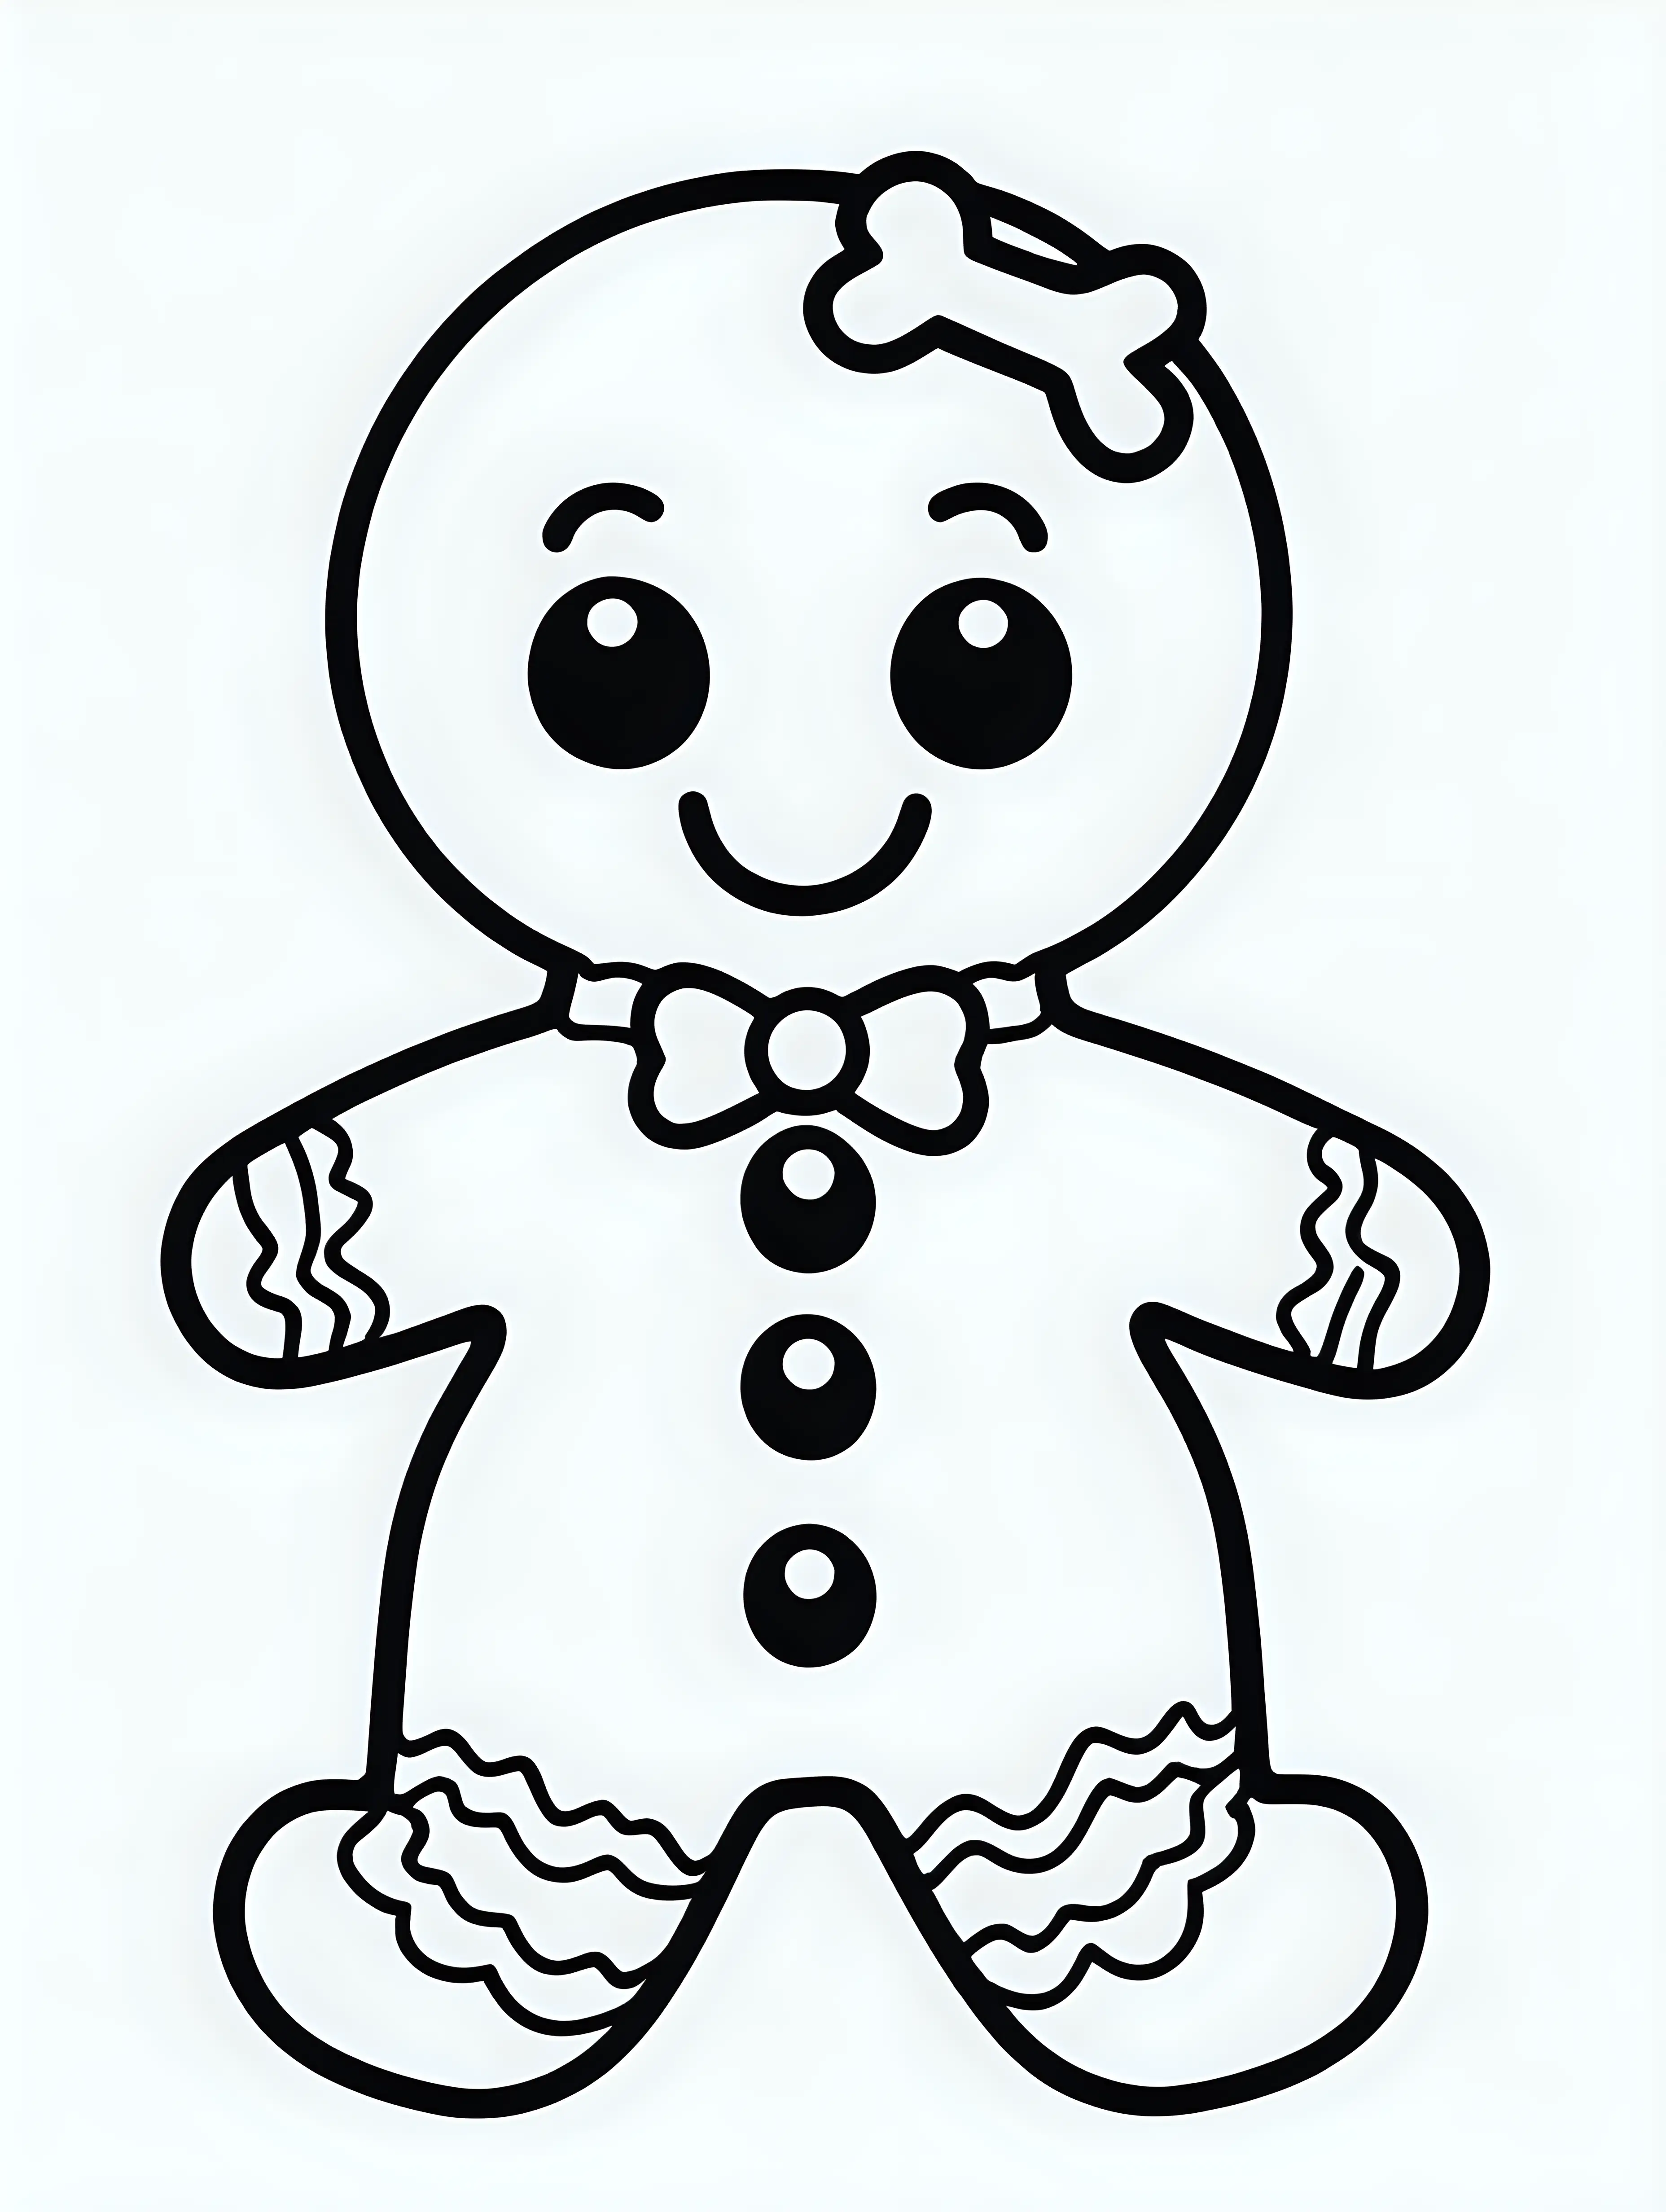 coloring book, cartoon drawing, clean black and white, single line, white background, large cute gingerbread man, emoji